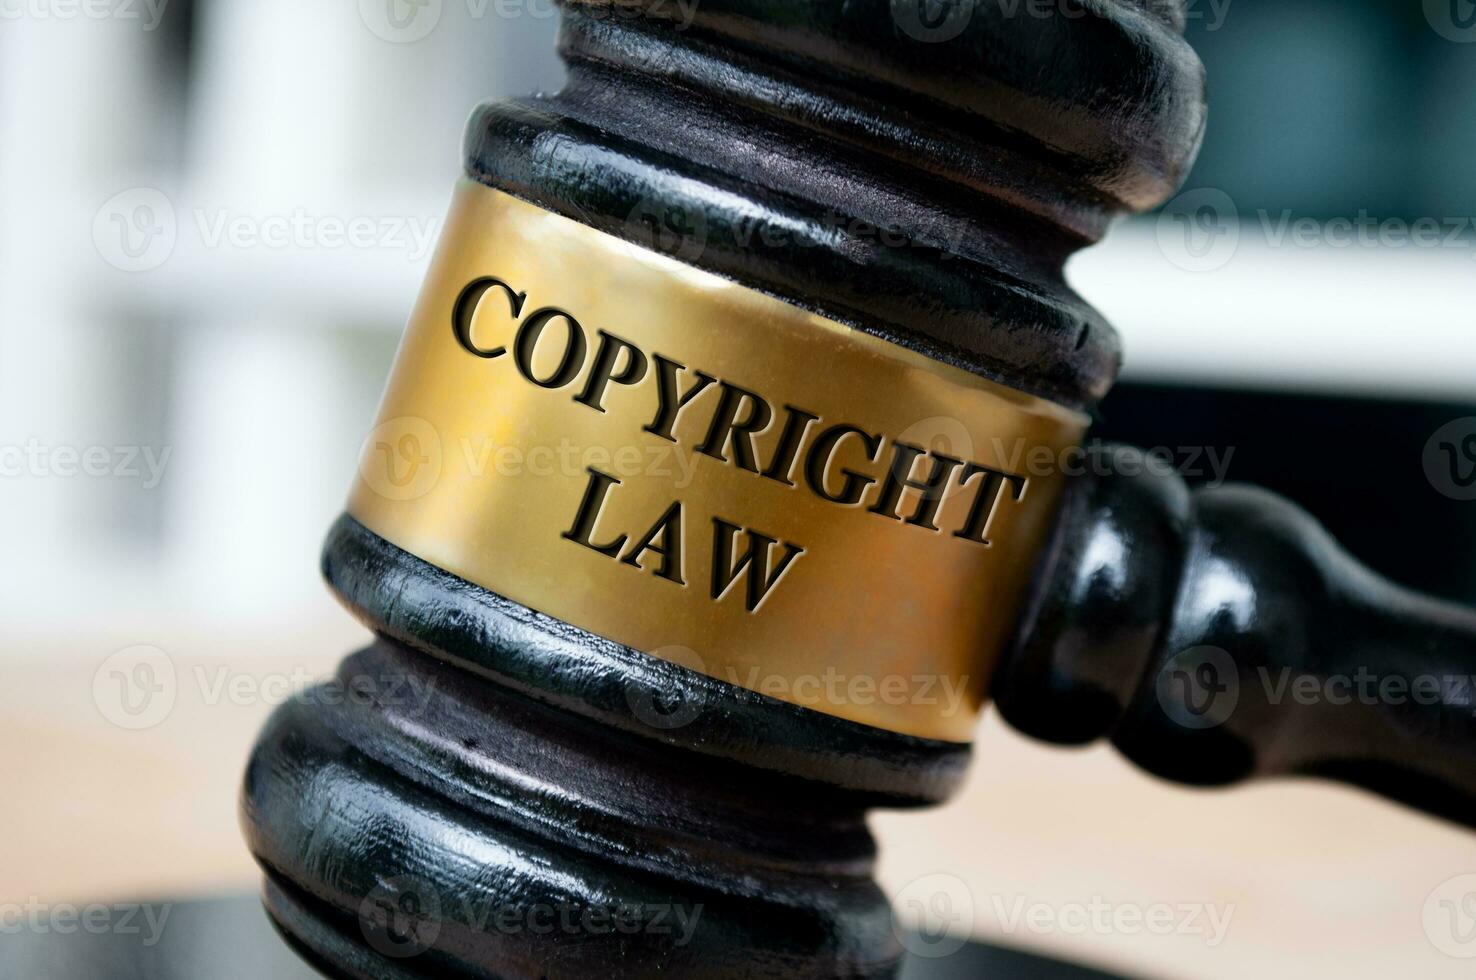 Copyright law text engraved on gavel. Probate Law and Legal concept photo